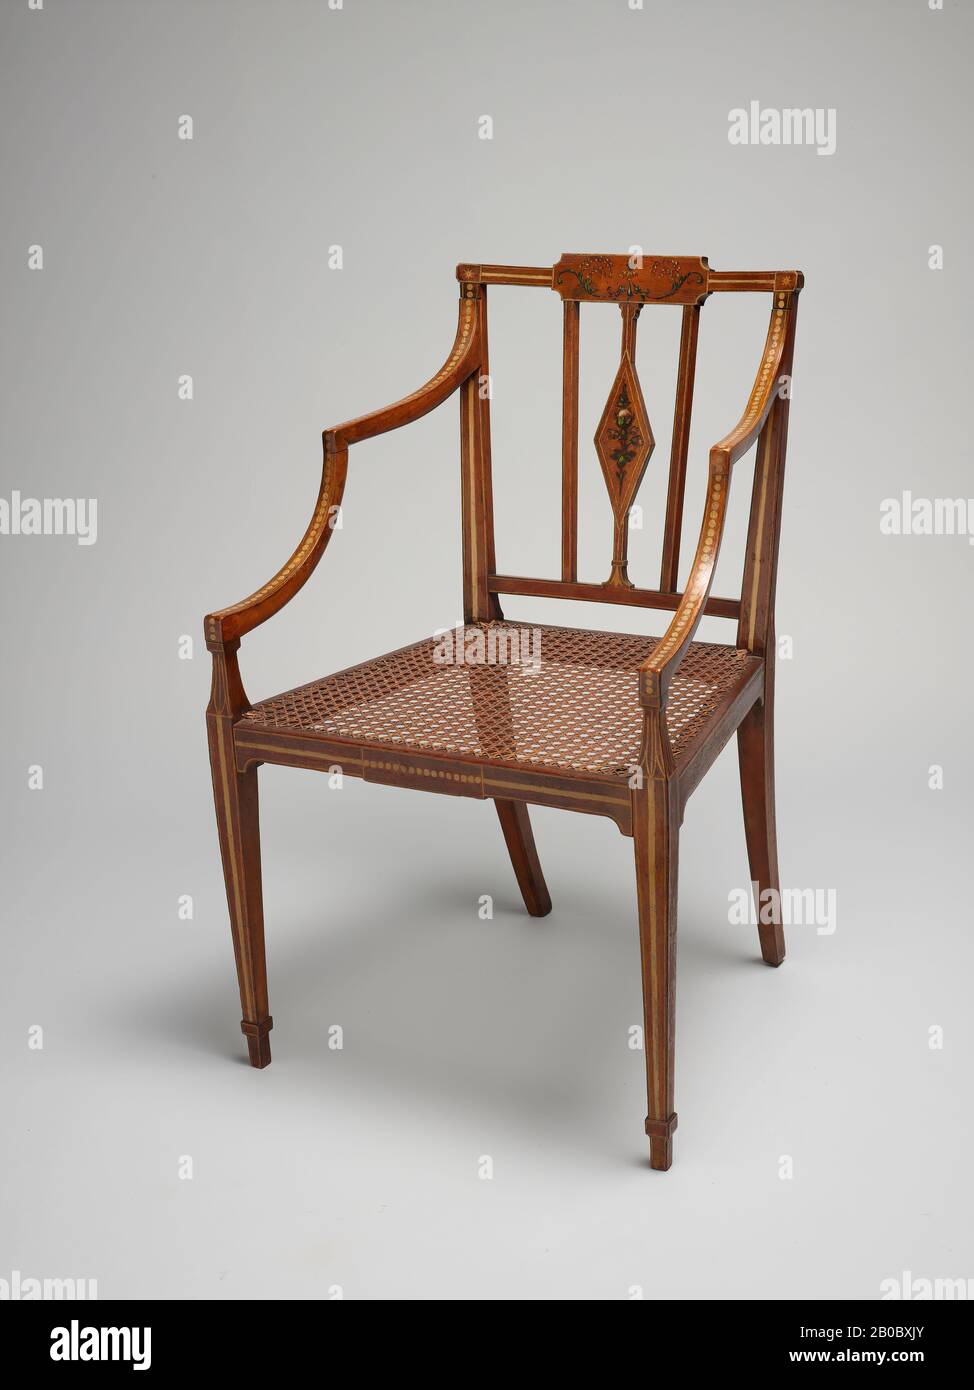 Unknown Artist, Armchair, 1790-1815, fruitwood, and cane, 16 3/4 in. x 21 7/8 in. x 18 in. (42.5 cm. x 55.6 cm. x 45.7 cm.) Stock Photo